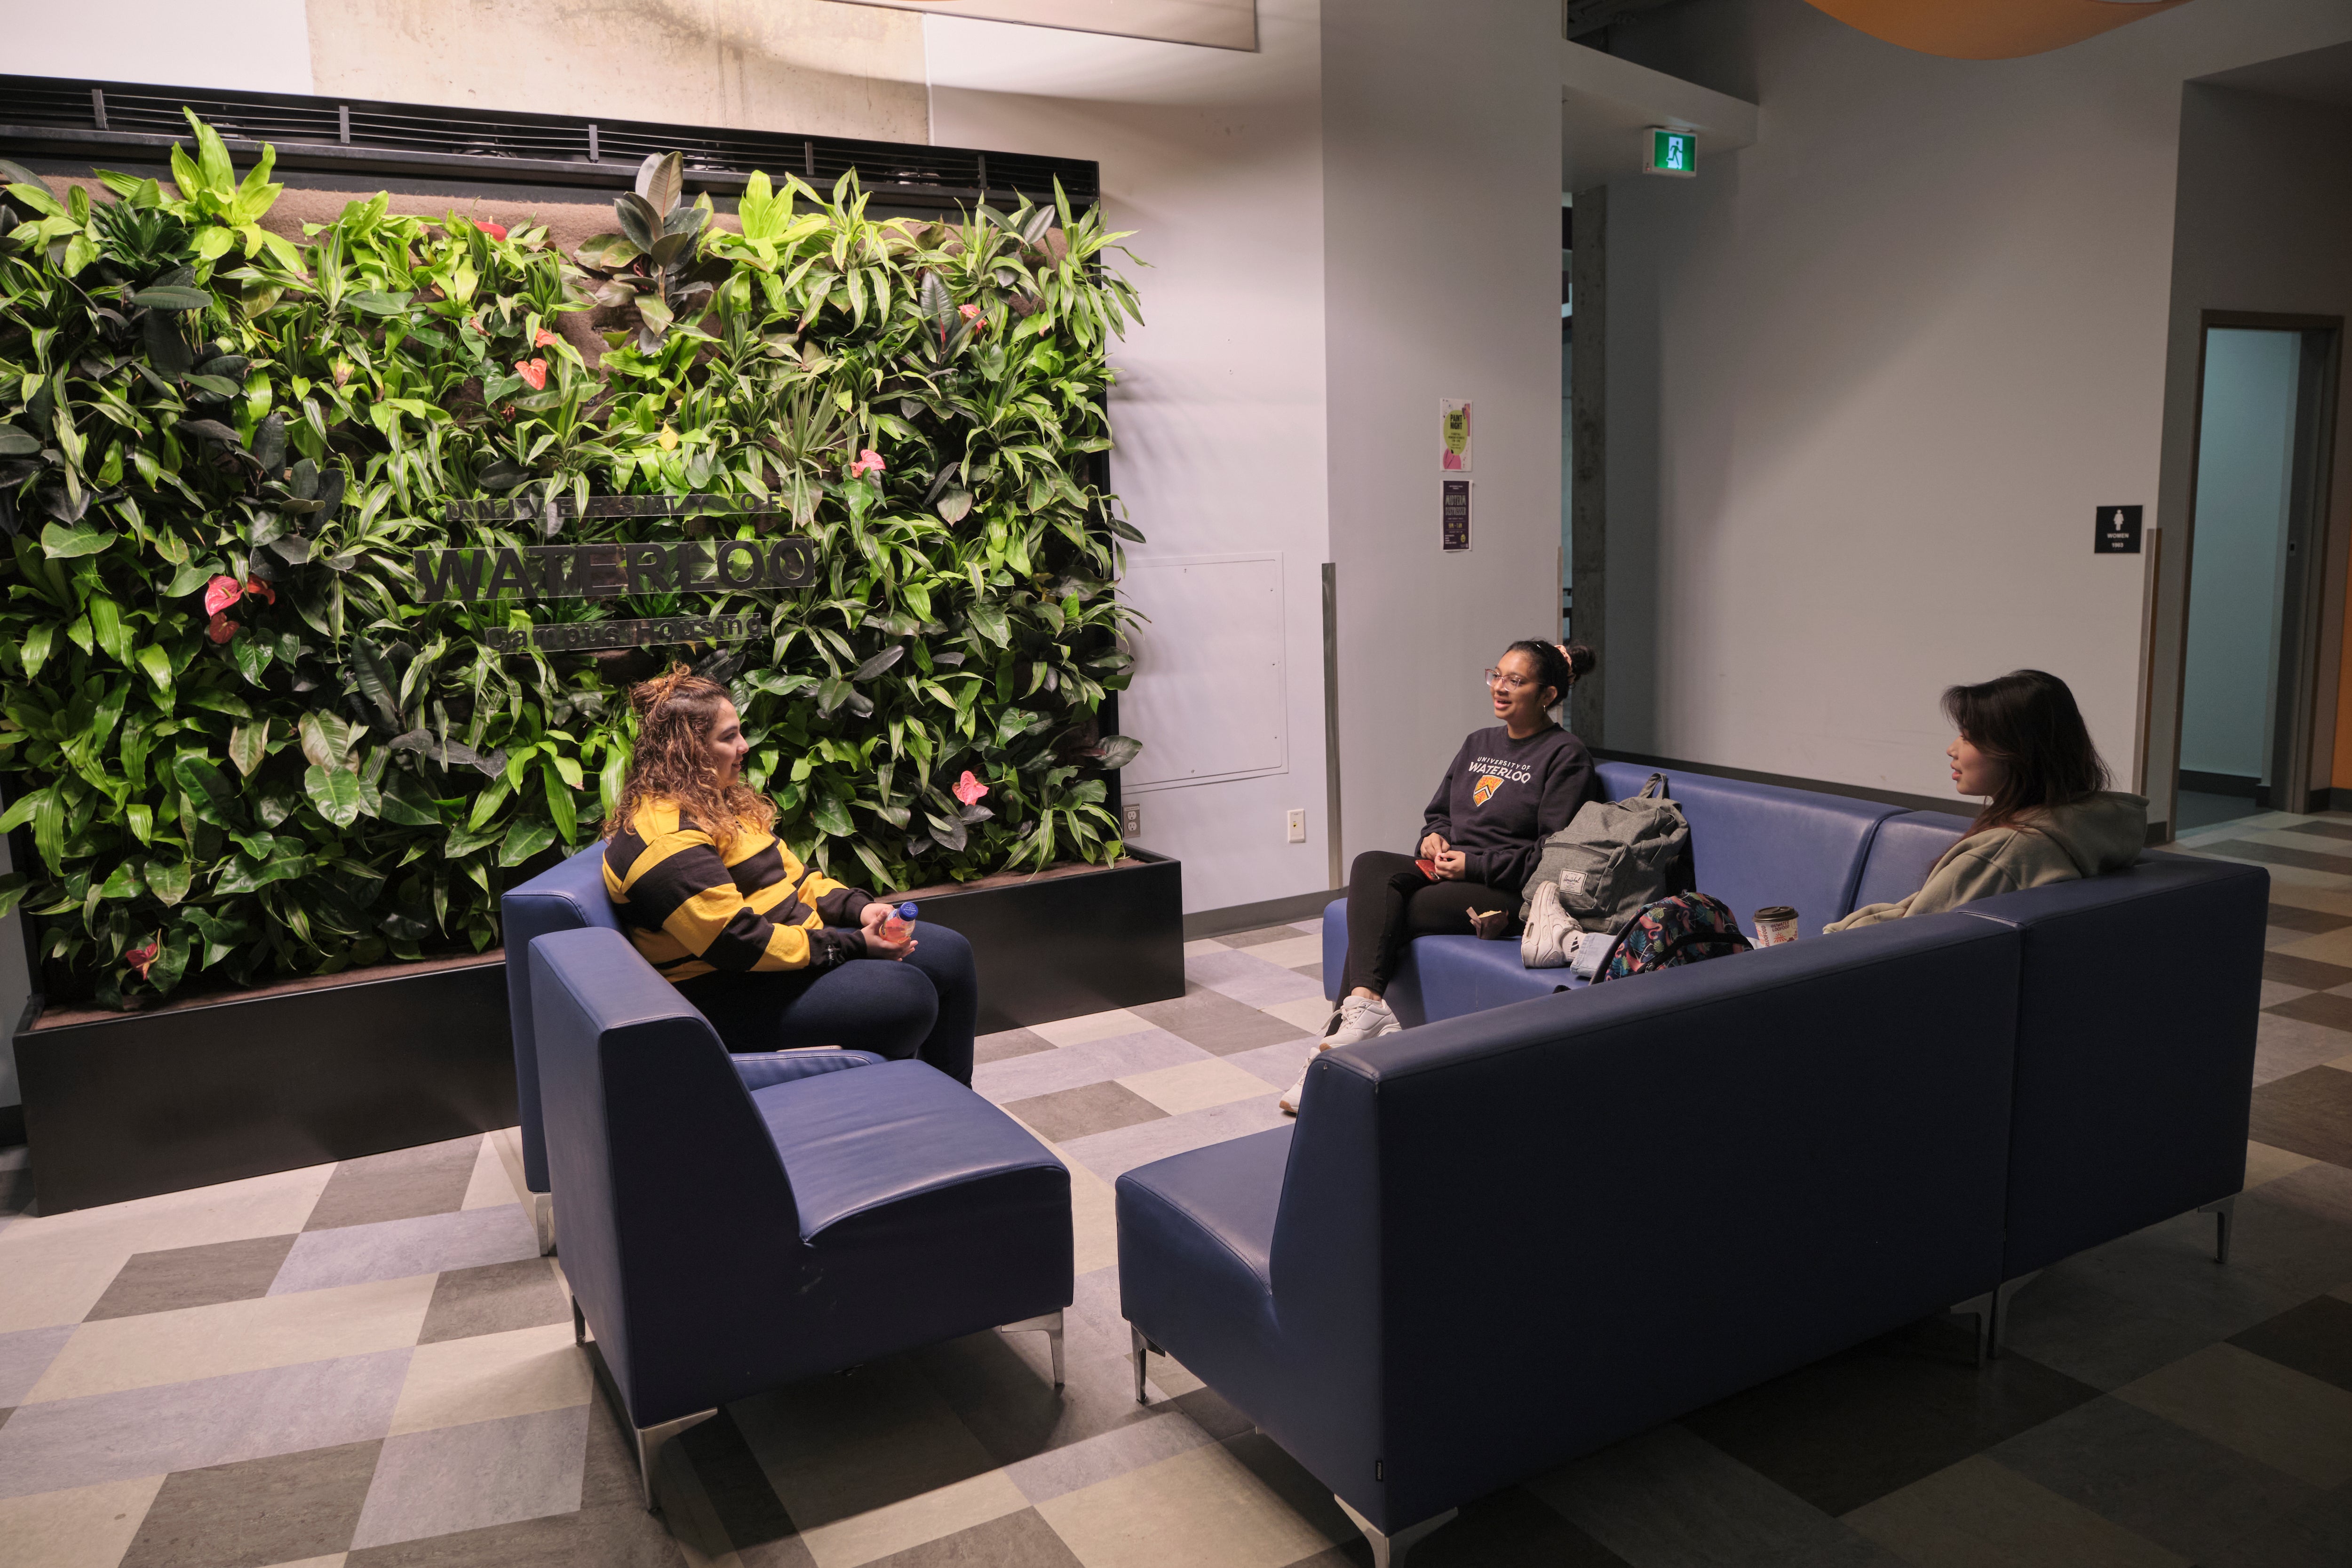 Claudette Millar Hall main floor seating area and plant wall